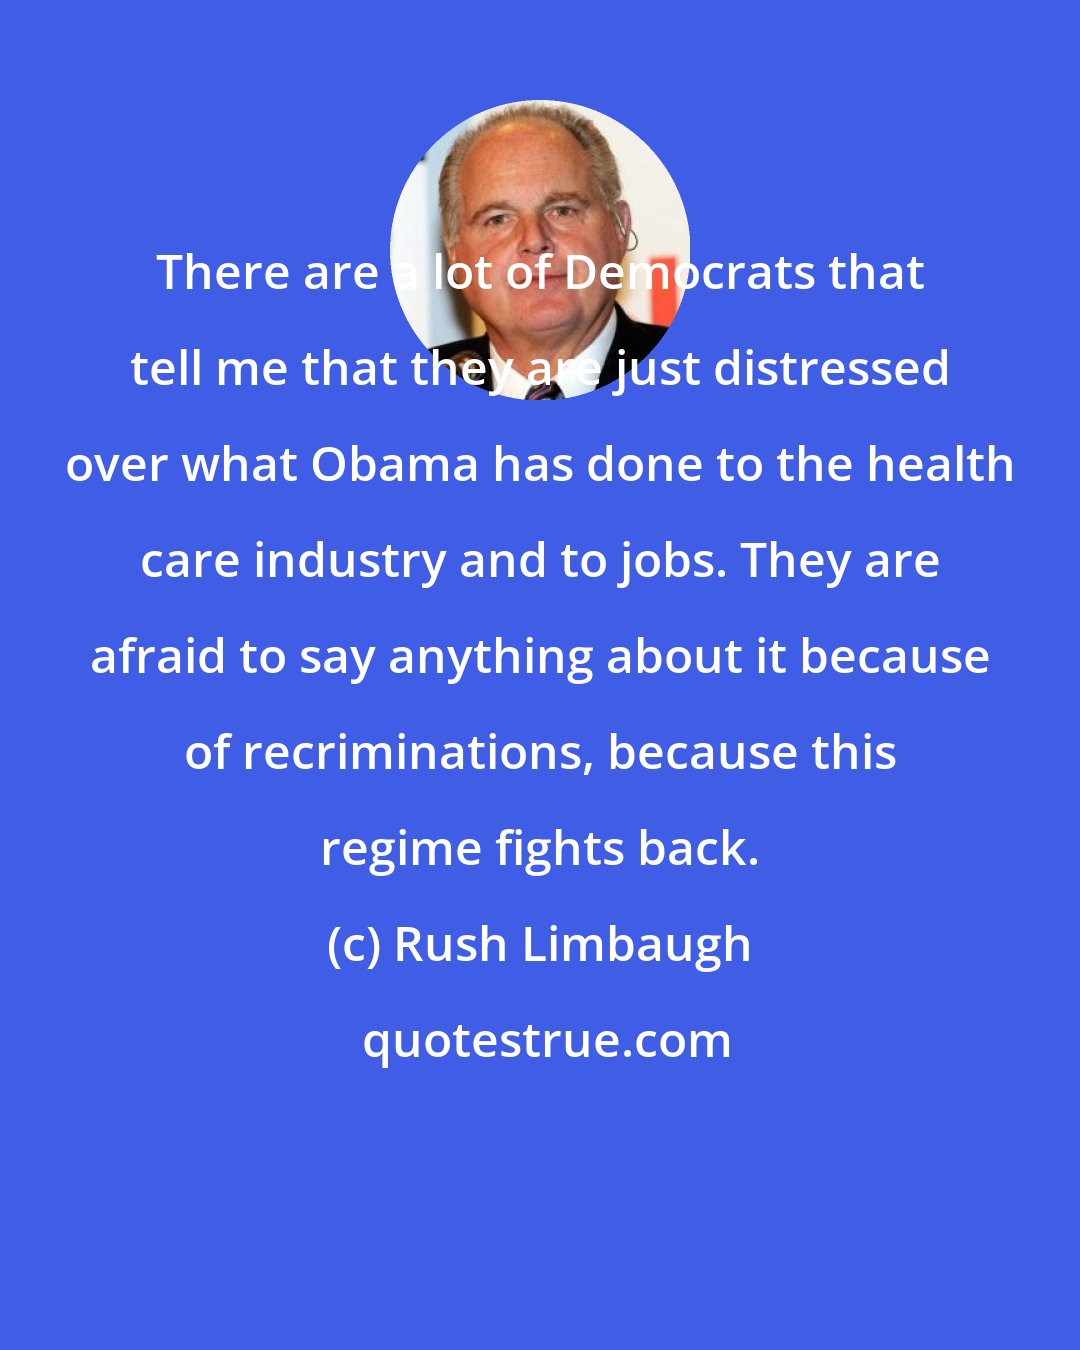 Rush Limbaugh: There are a lot of Democrats that tell me that they are just distressed over what Obama has done to the health care industry and to jobs. They are afraid to say anything about it because of recriminations, because this regime fights back.